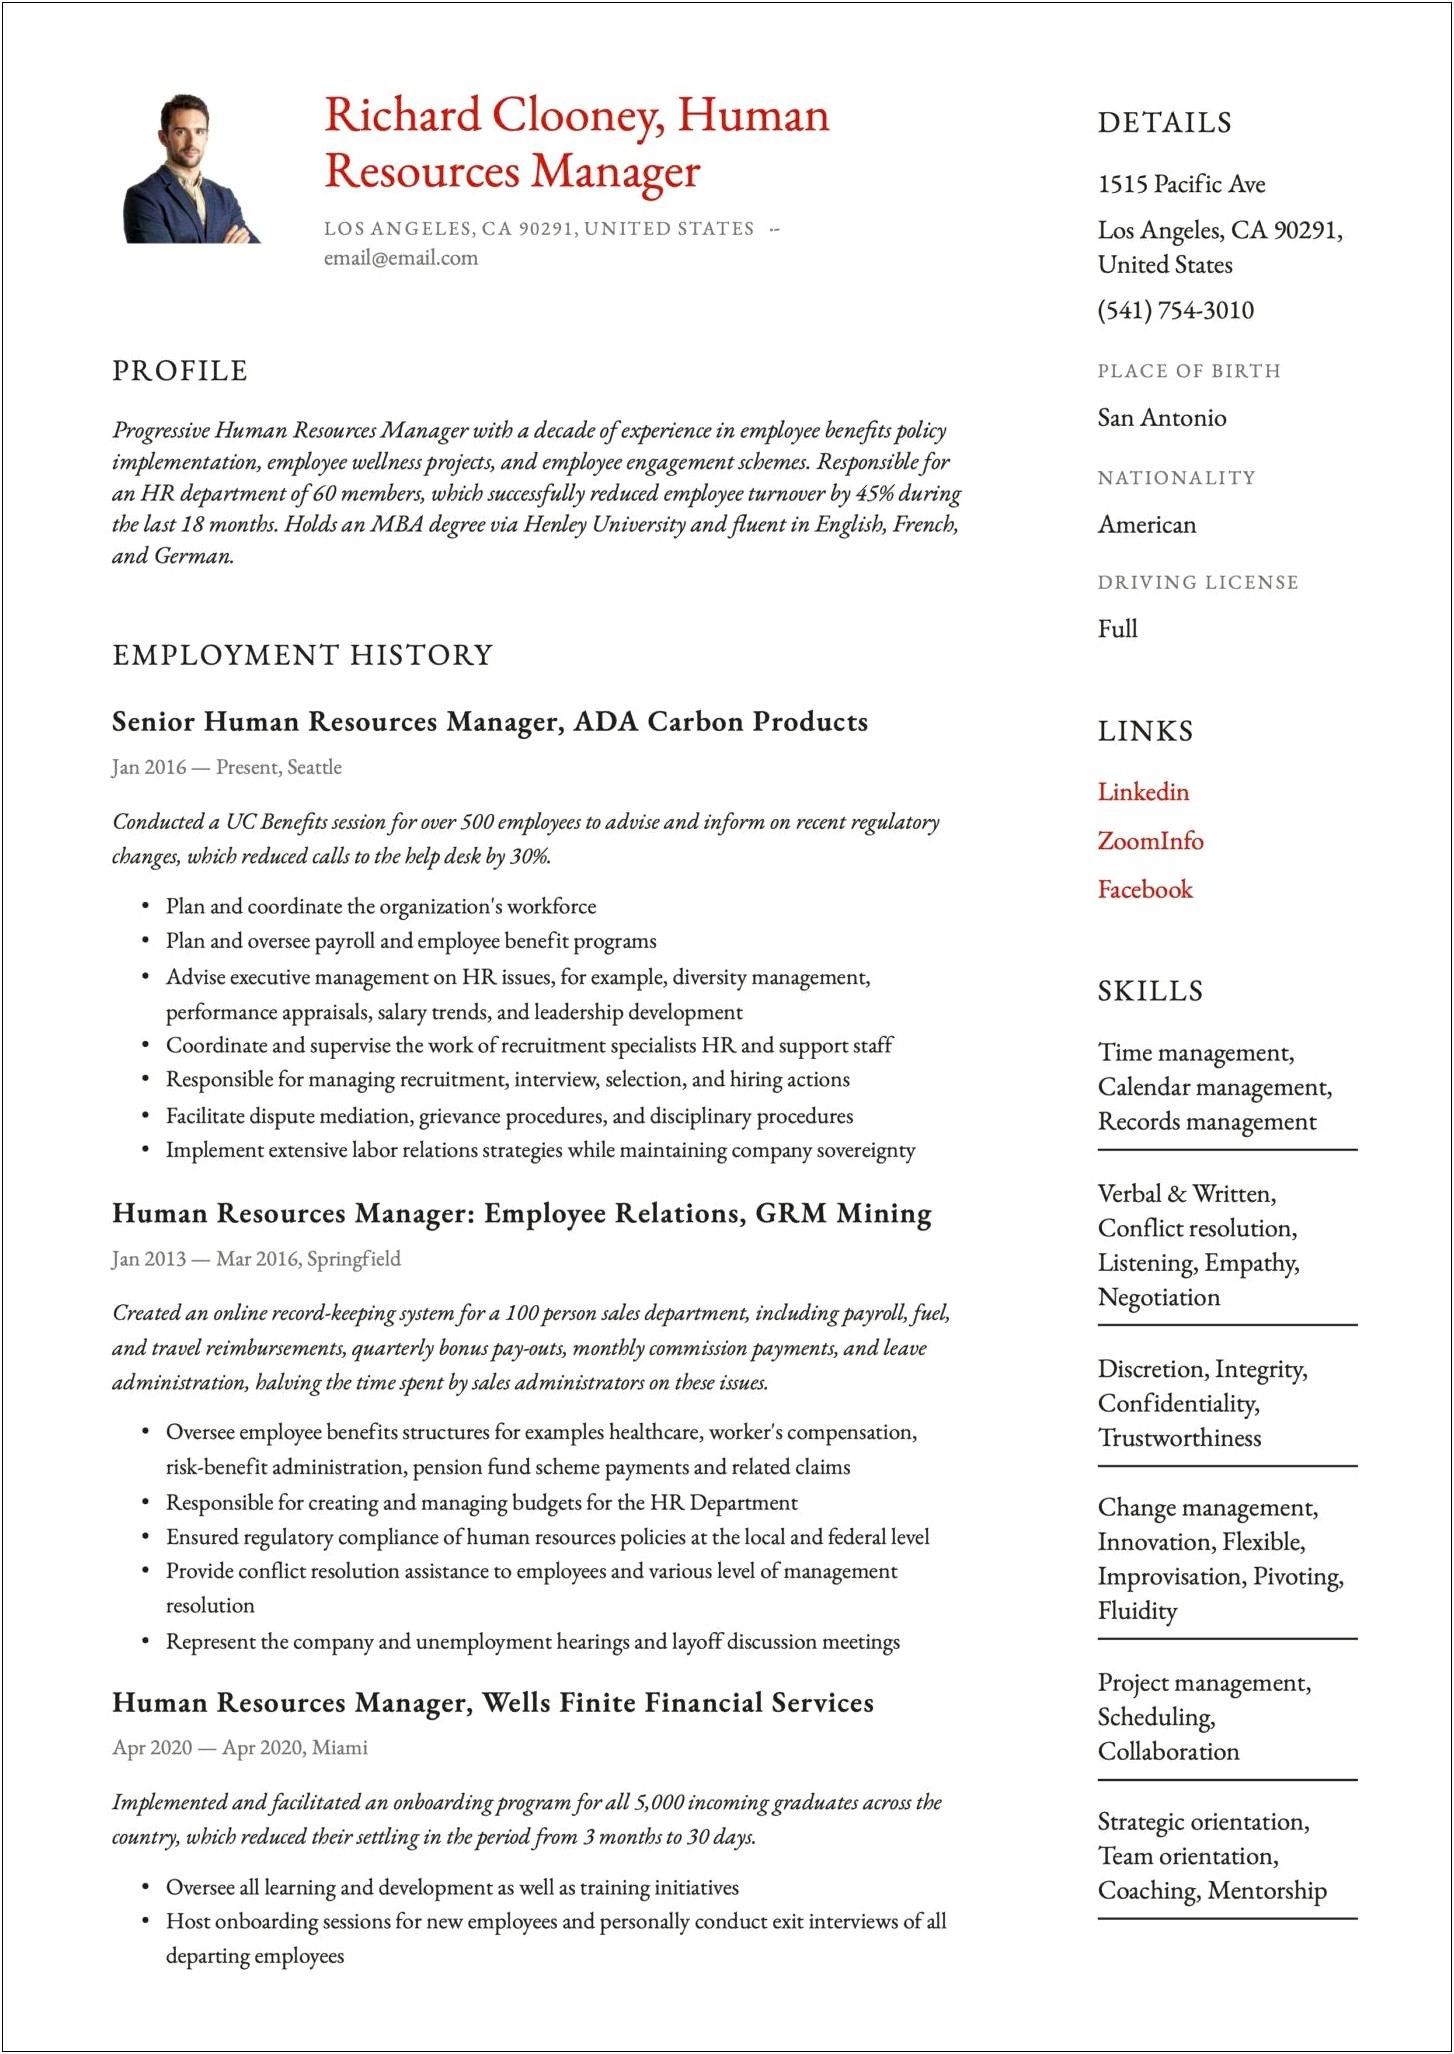 Talent Manager Resume Conducting Orientation